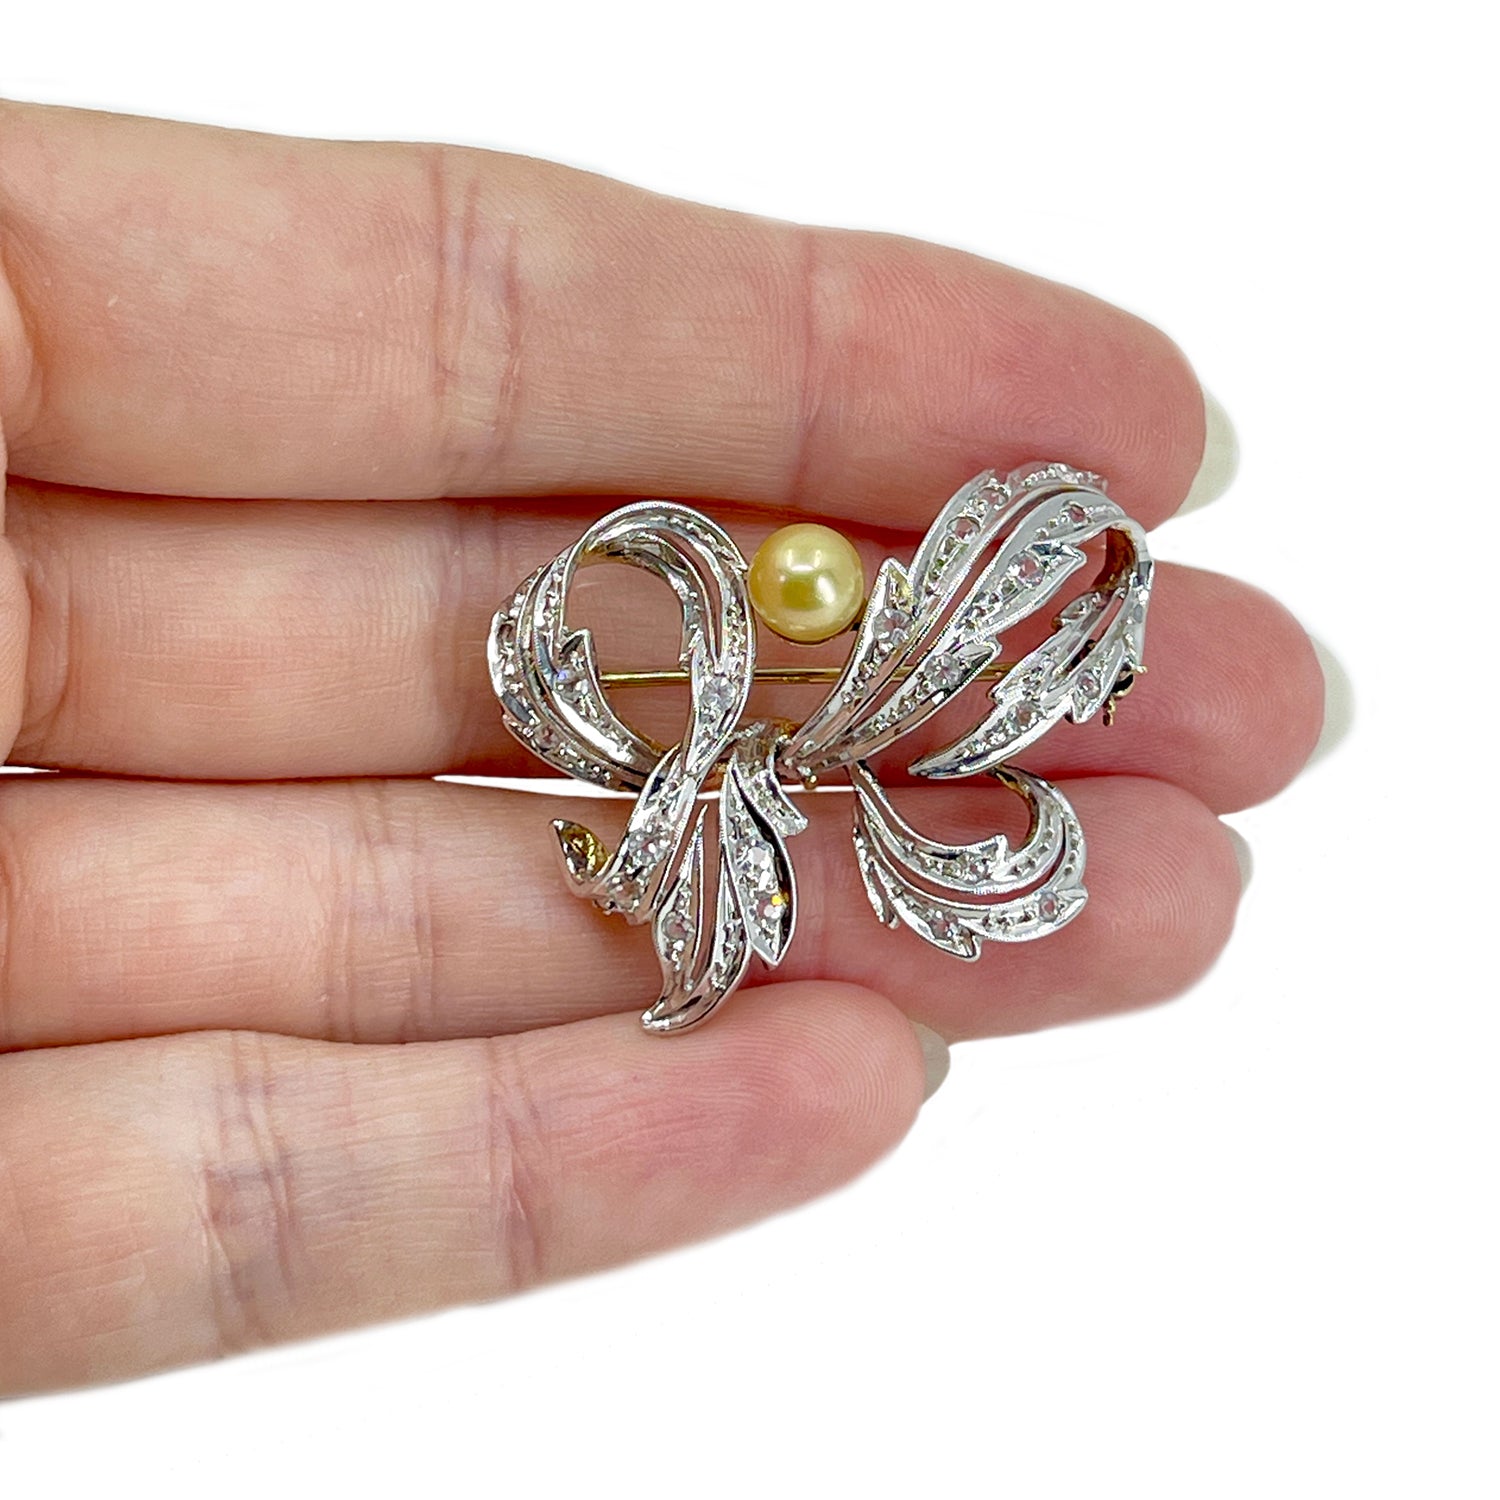 Victorian Two Tone Vintage Golden Japanese Cultured Saltwater Akoya Pearl Brooch- Sterling Silver Gold Plate